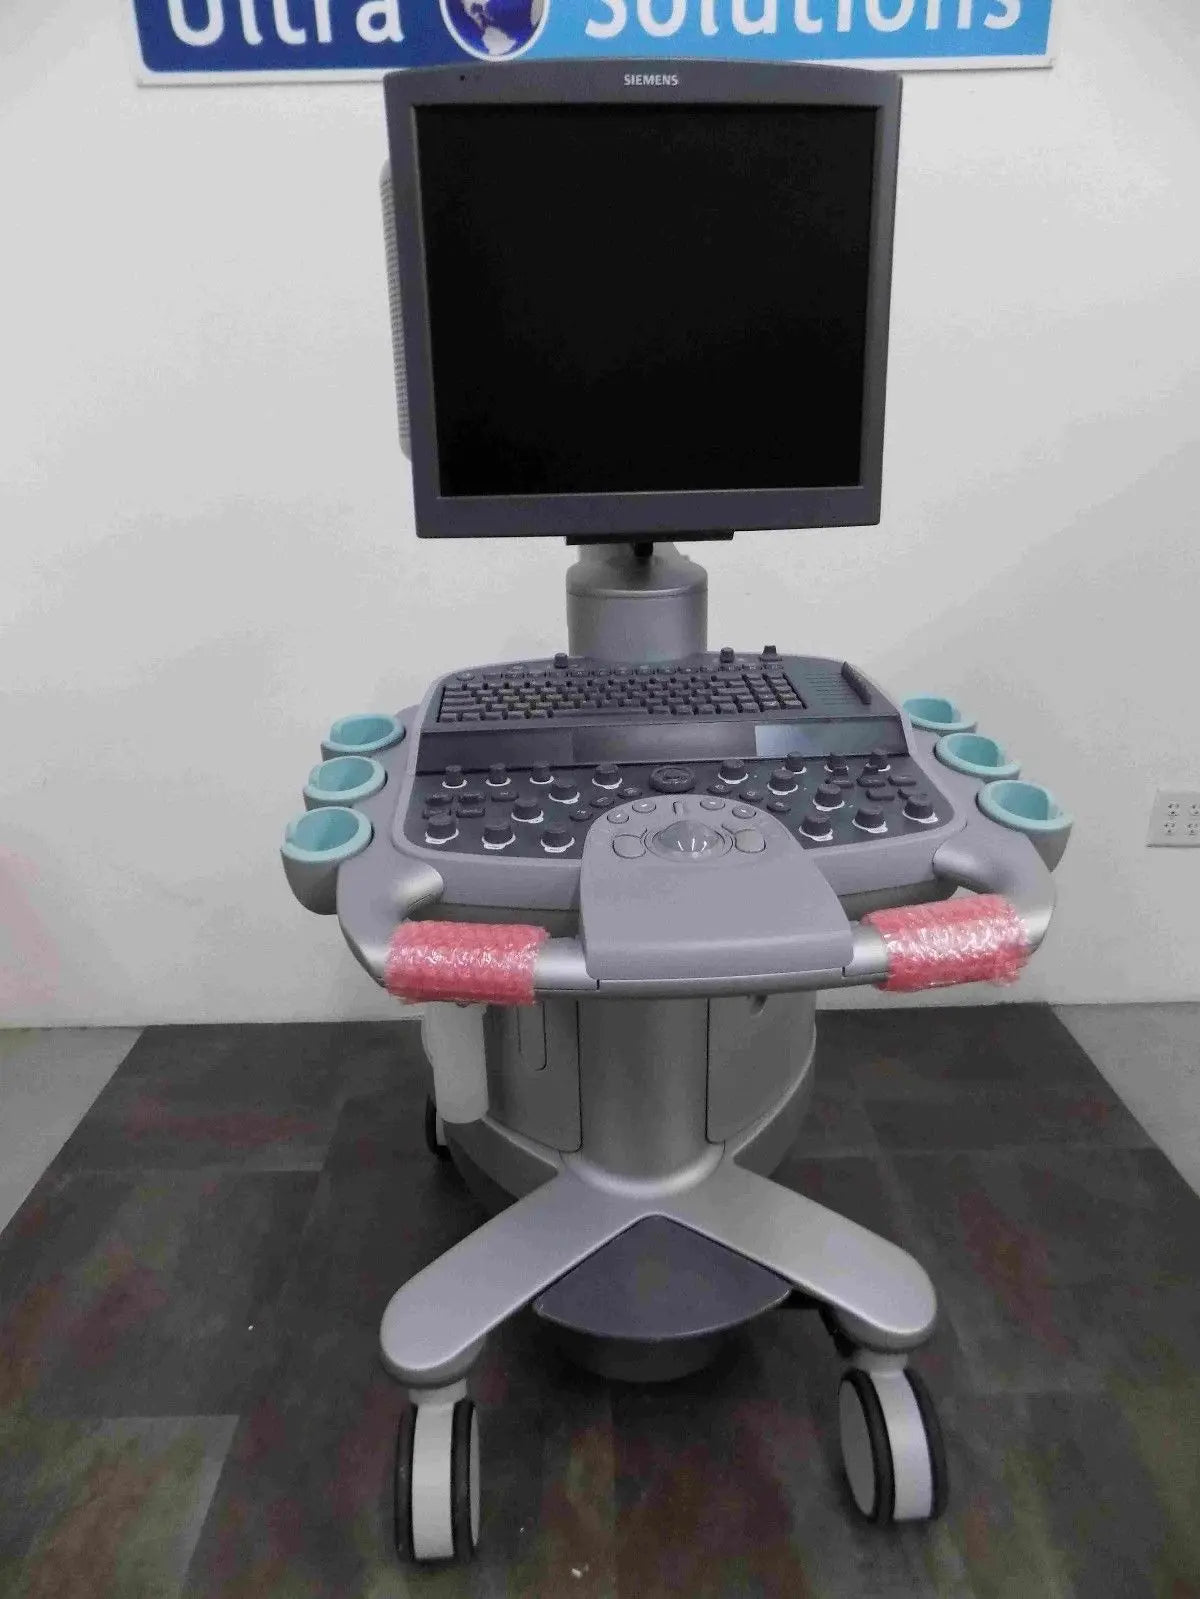 Siemens S2000 Ultrasound System DIAGNOSTIC ULTRASOUND MACHINES FOR SALE